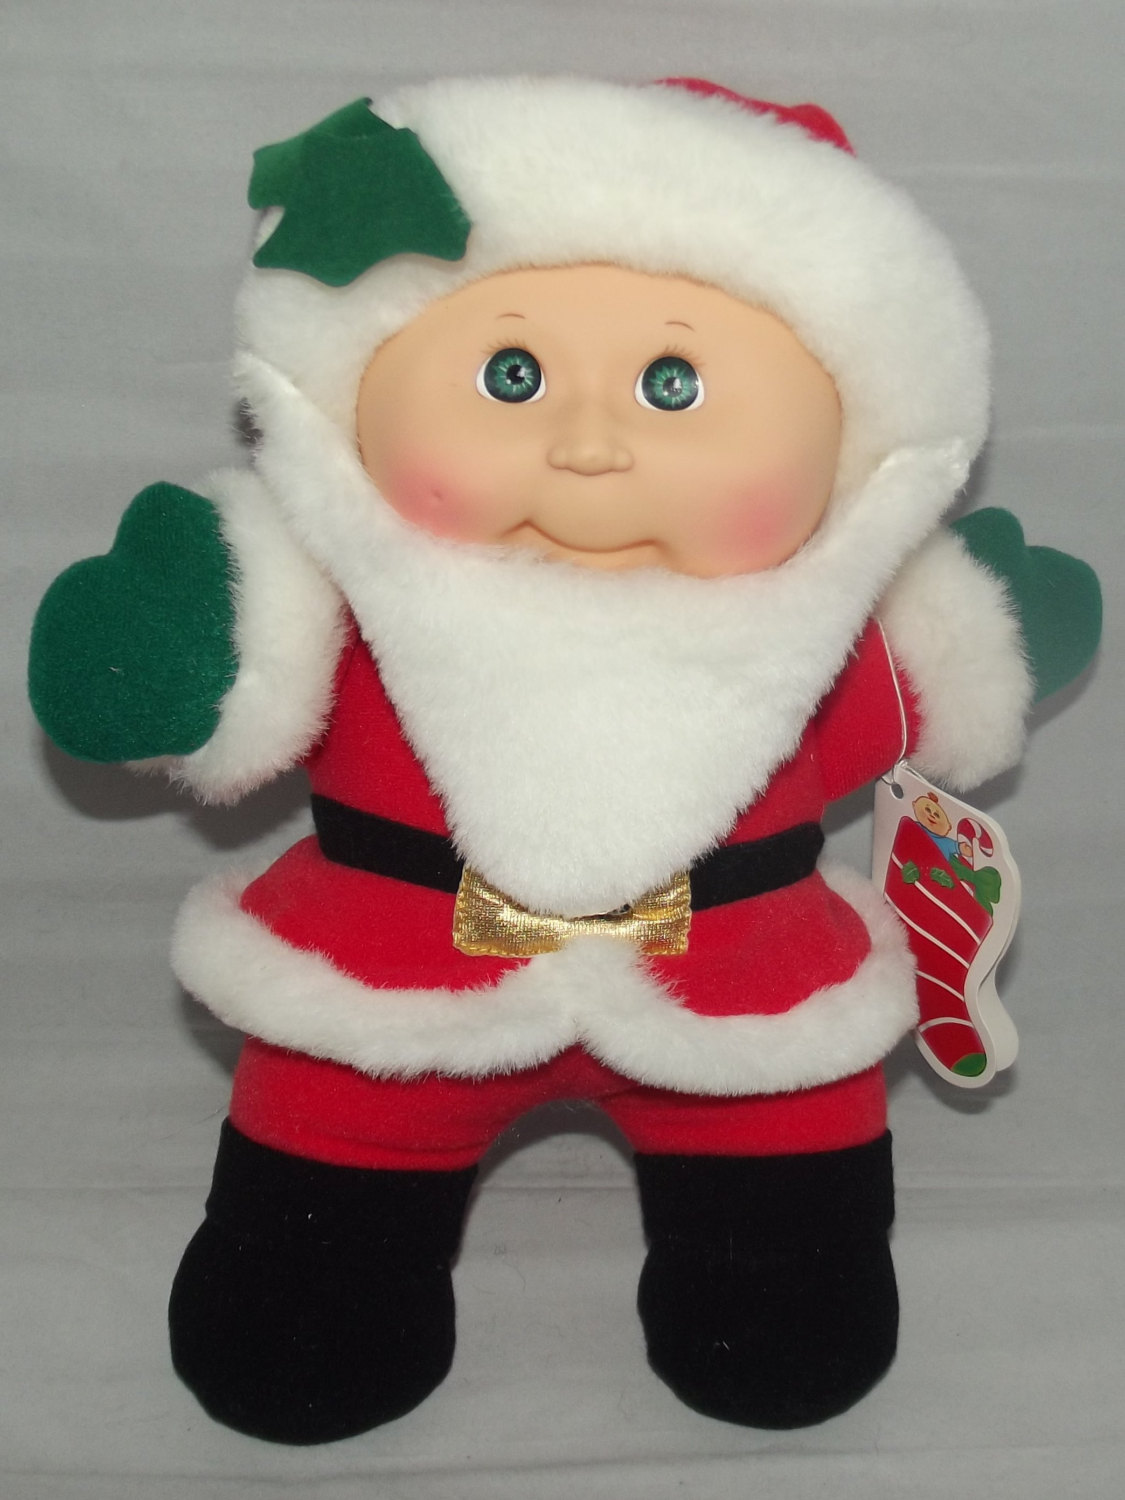 MINT - Christmas Cabbage Patch Kid - Wal Mart Exclusive Item ...